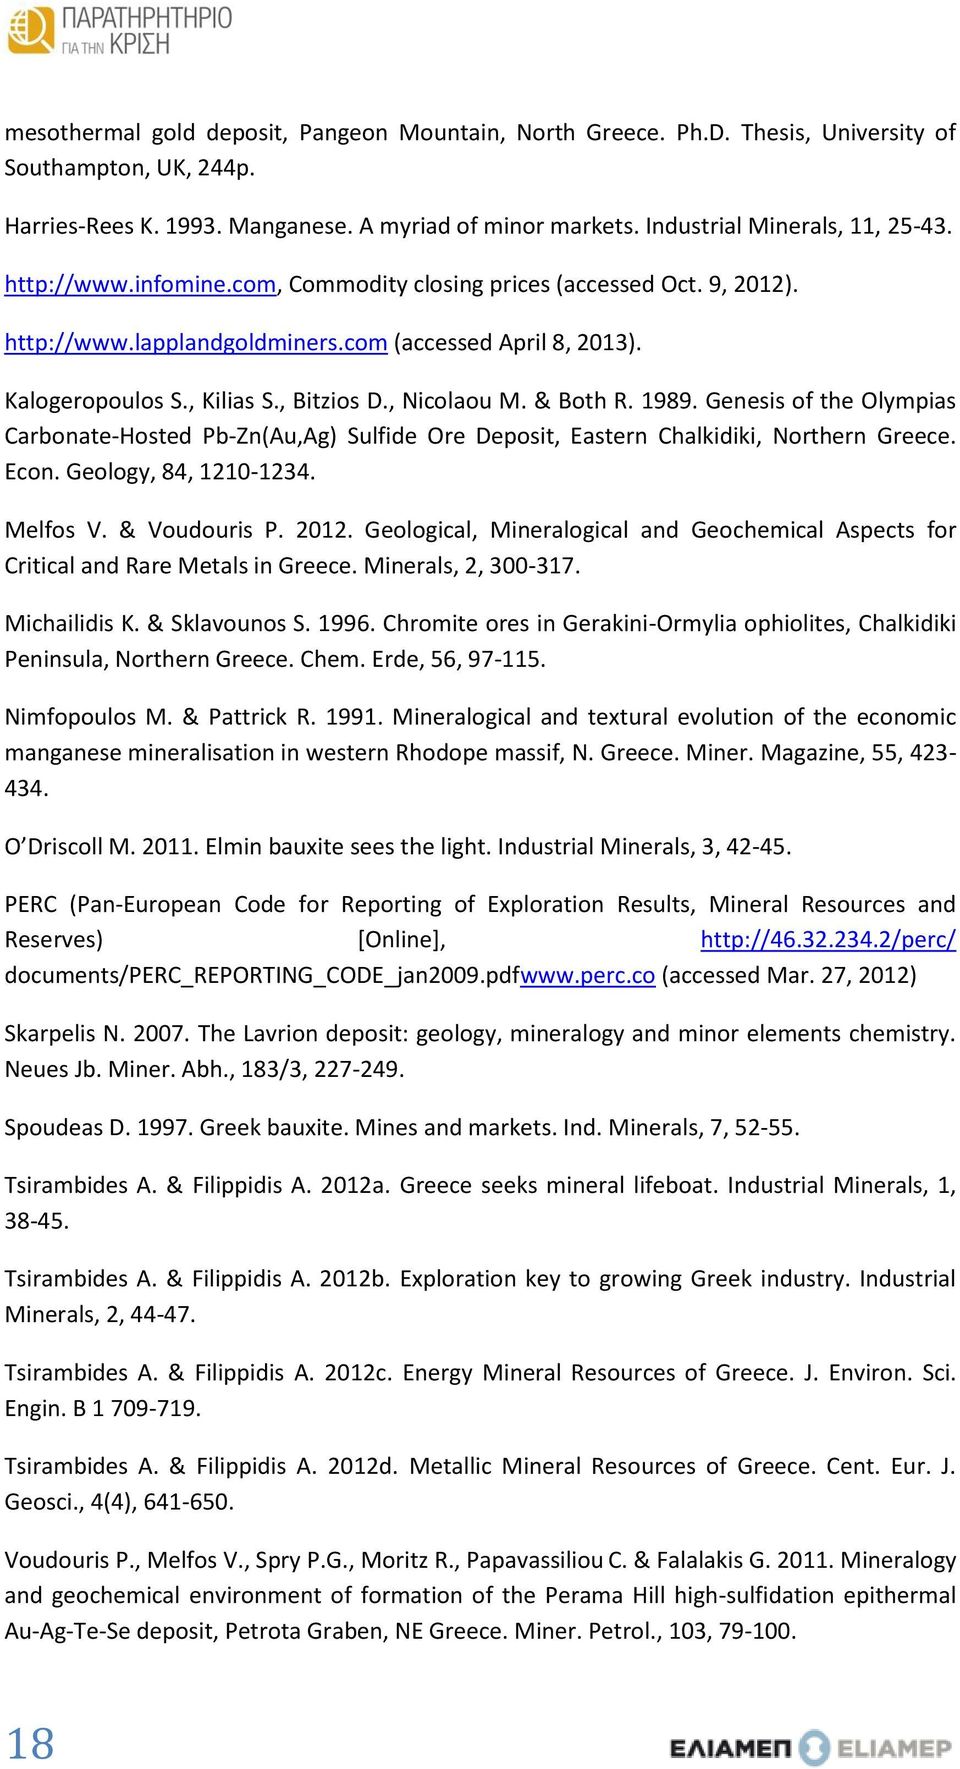 1989. Genesis of the Olympias Carbonate-Hosted Pb-Zn(Au,Ag) Sulfide Ore Deposit, Eastern Chalkidiki, Northern Greece. Econ. Geology, 84, 1210-1234. Melfos V. & Voudouris P. 2012.